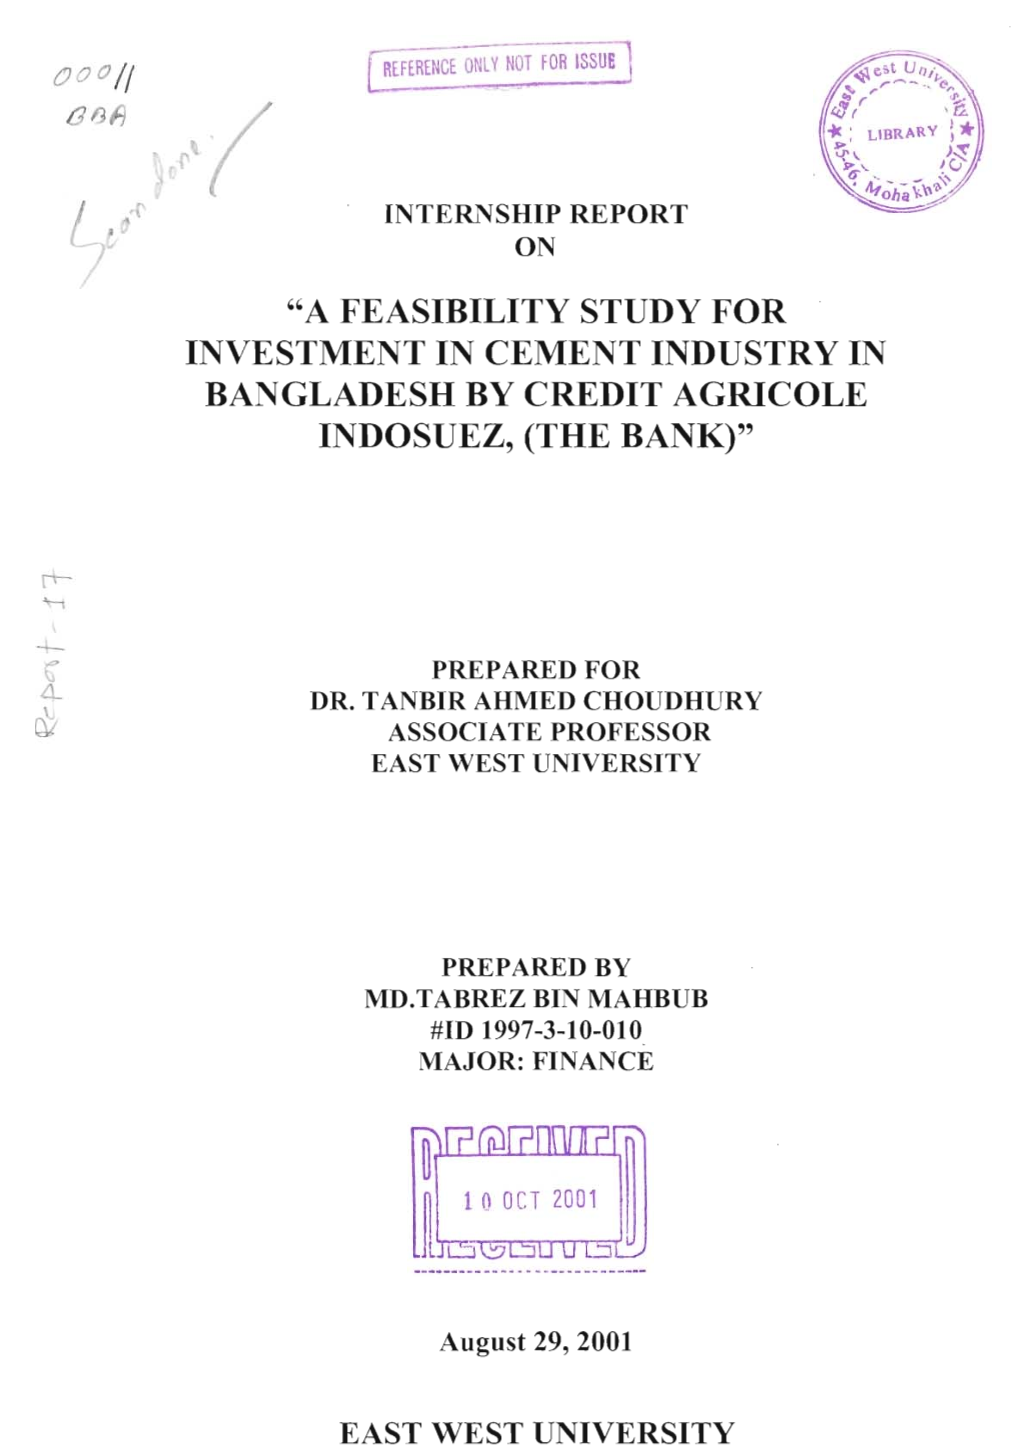 "A Feasibility Study for Investment in Cement Industry in Bangladesh by Credit Agricole Indosuez, (The Bank)"